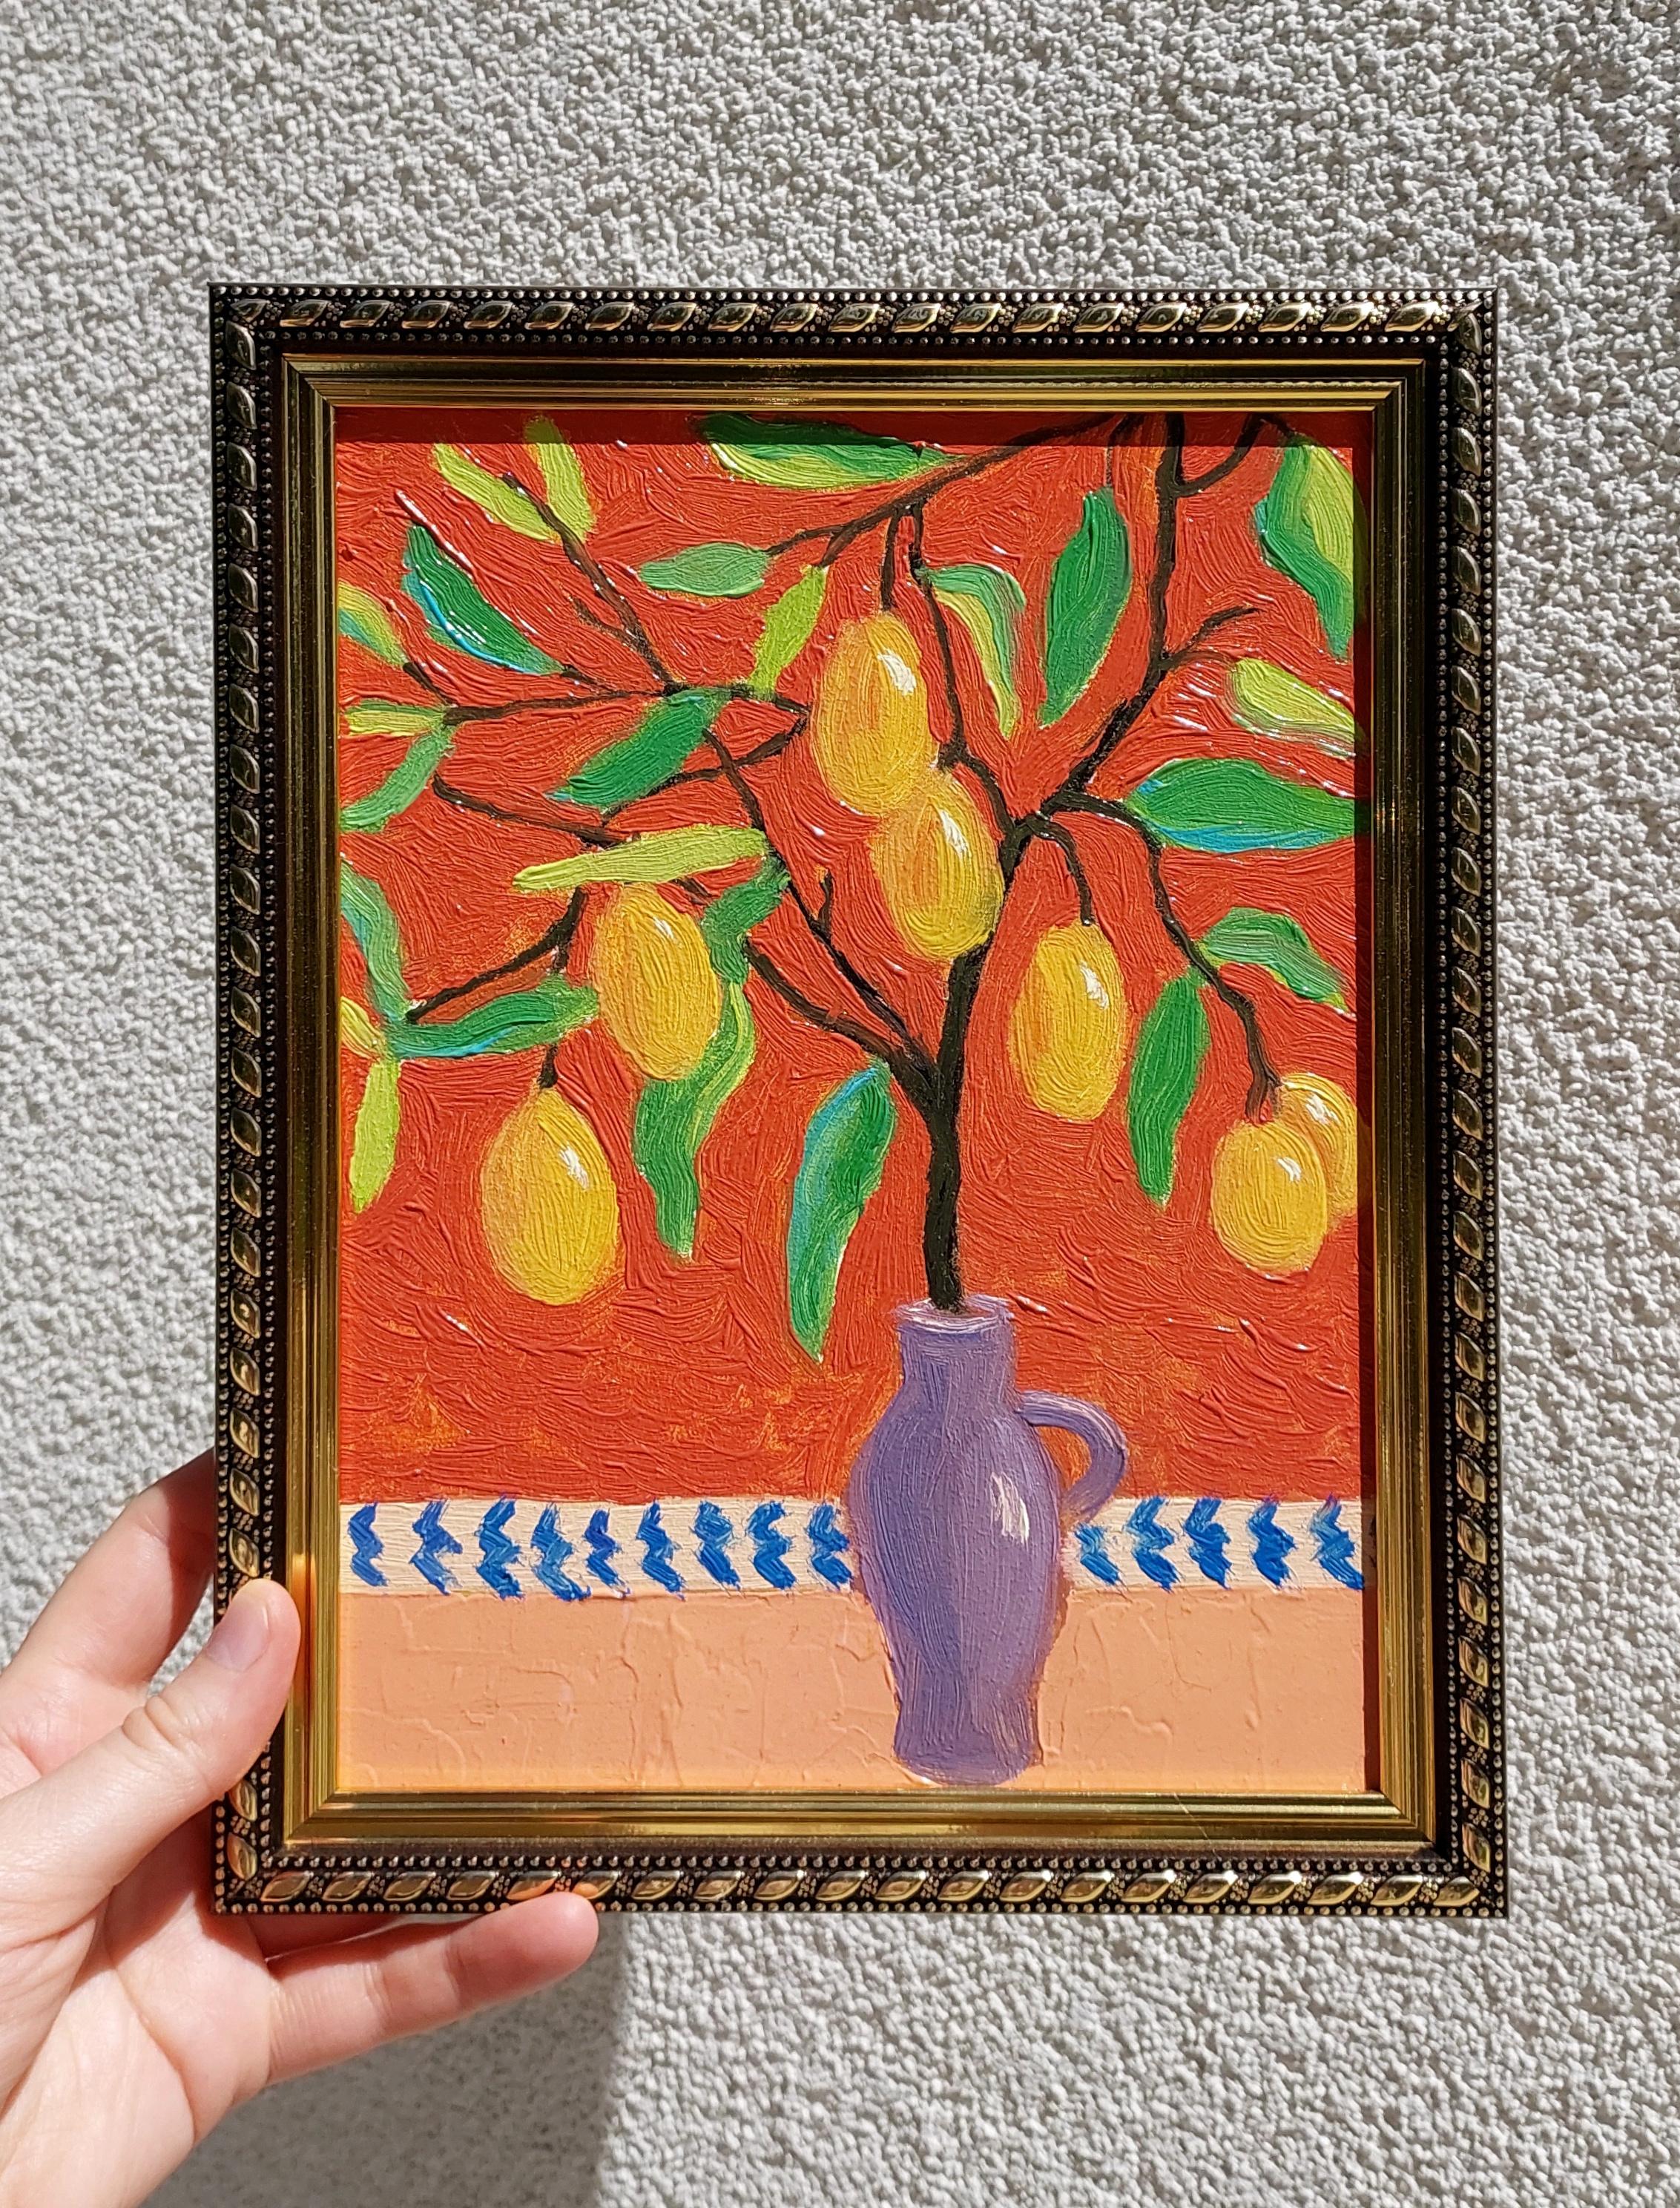 Sweet and Sour Original Oil Painting Lemon Tree by Ksenia Tsyganyuk For Sale 4